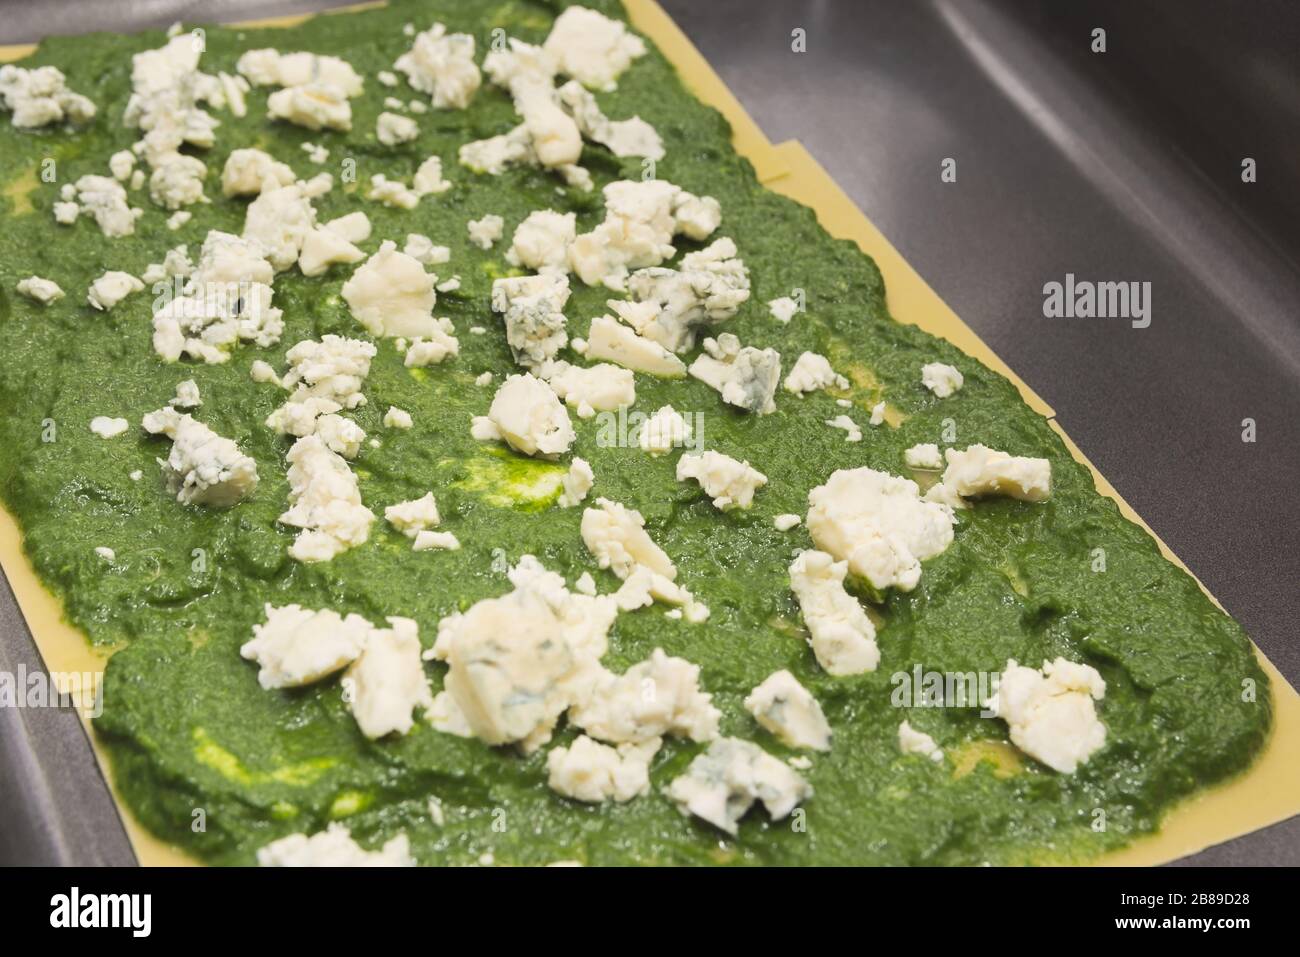 Spinach and Moldy Cheese on Raw Lasagne Pasta in Baking Sheet Stock Photo